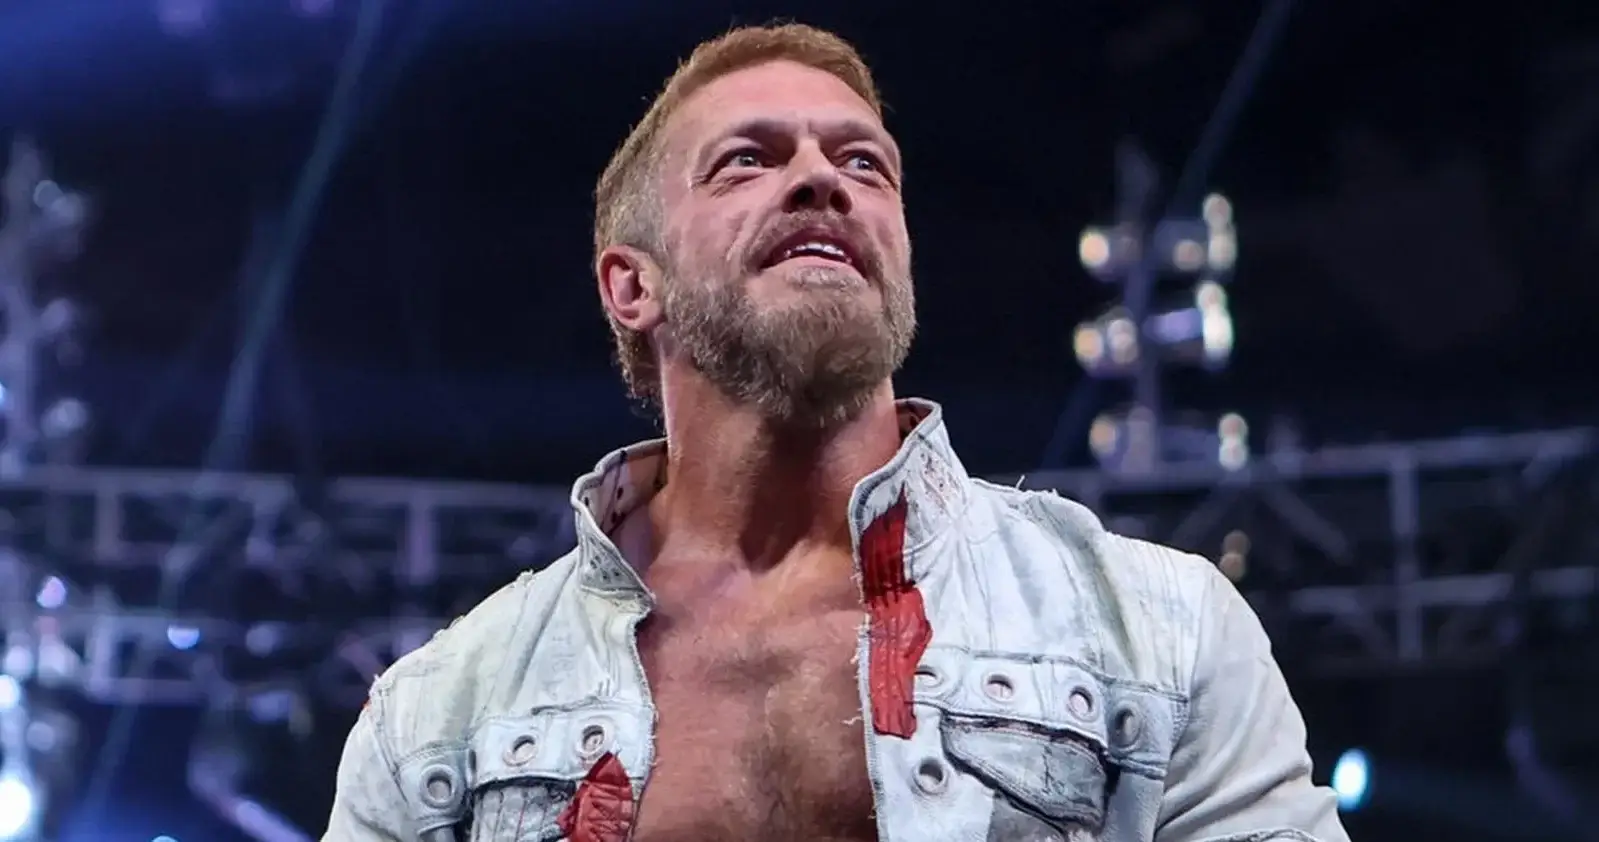 Edge is now expected to take some time away from WWE TV